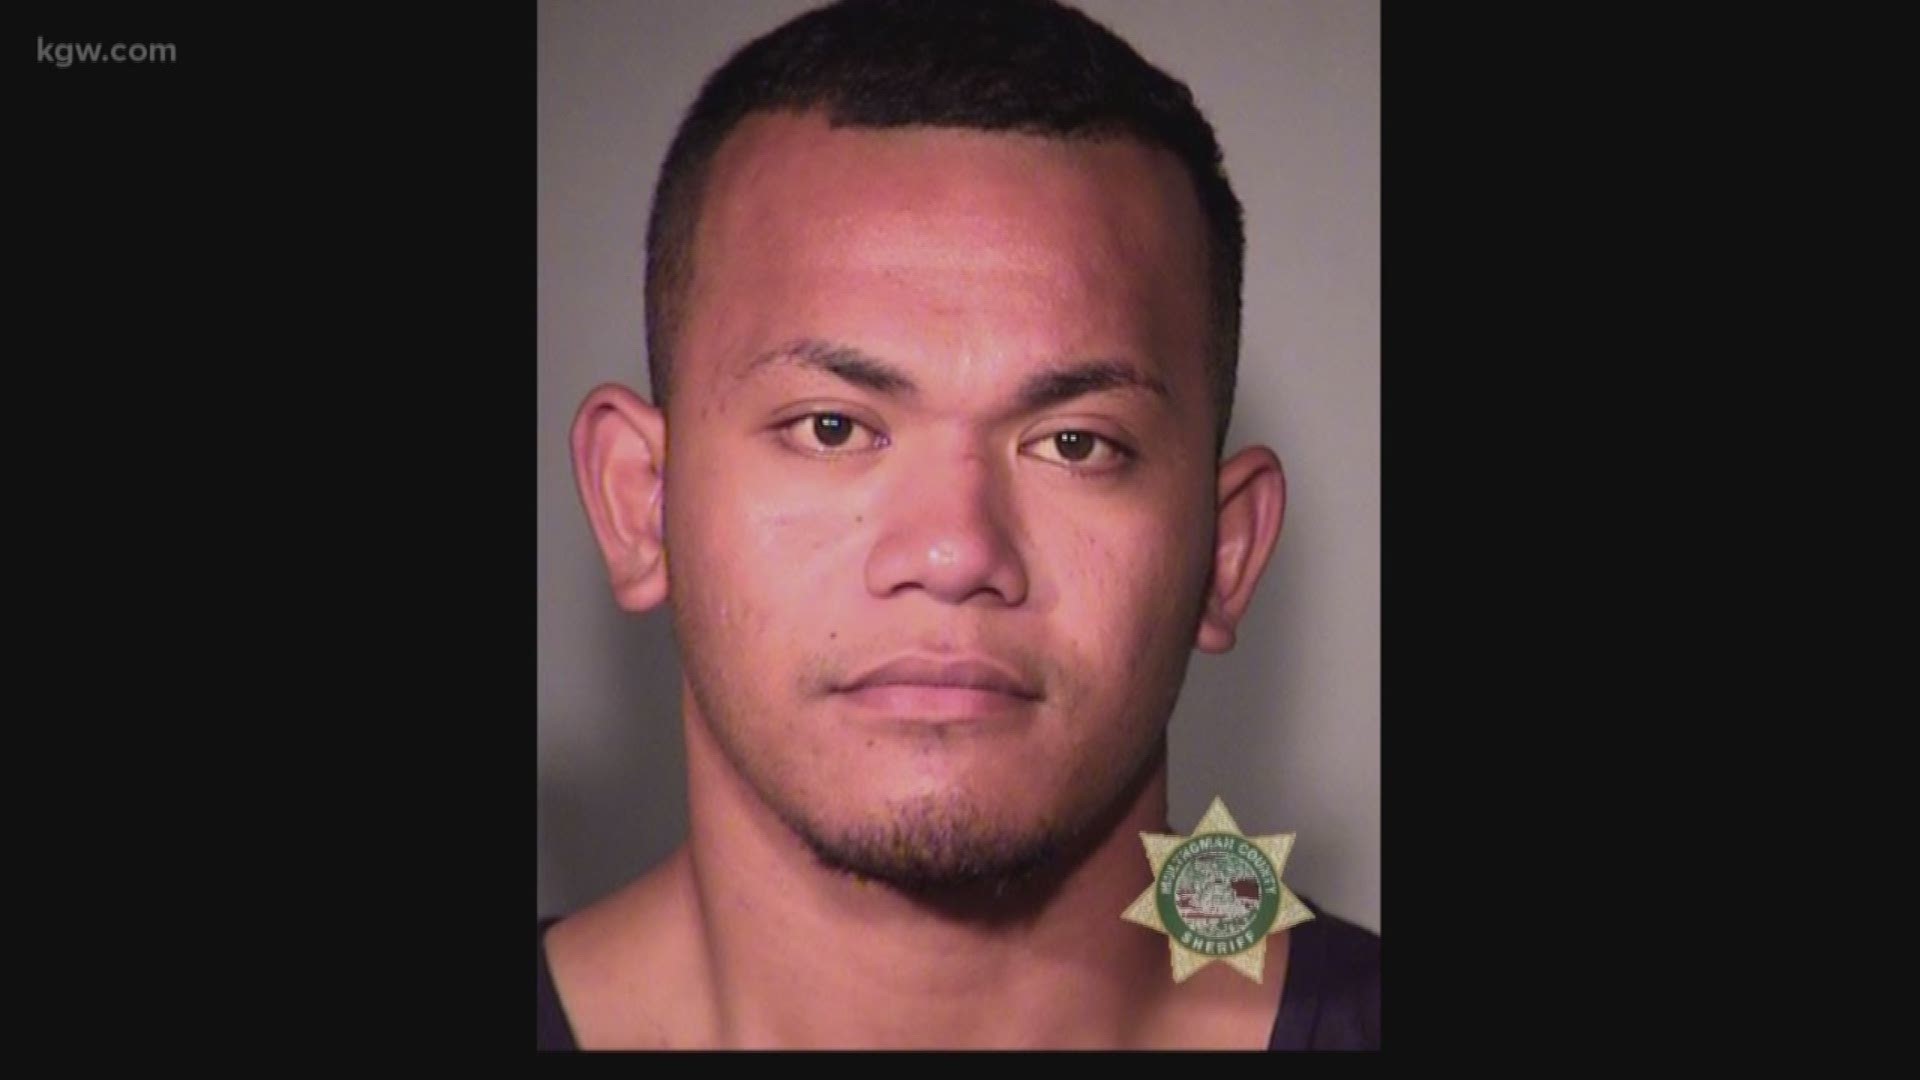 Toese, who has been involved in brawls at clashing protests in Portland, fled to Samoa after being indicted for allegedly assaulting a man in June 2018.